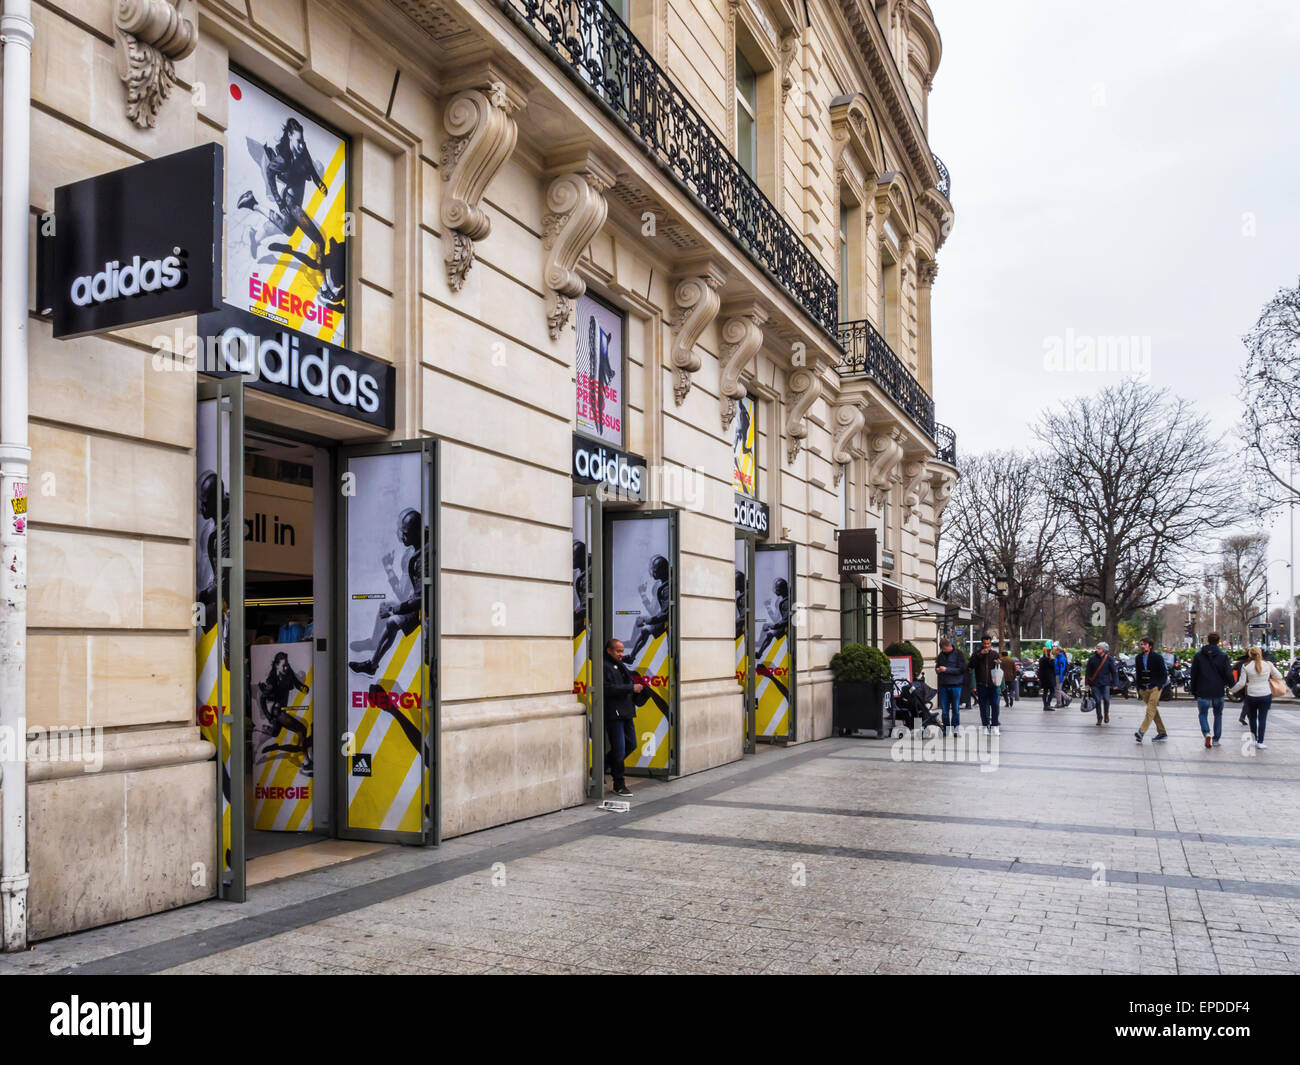 Adidas store exterior, shop selling sporting goods and clothing, Paris  Stock Photo - Alamy